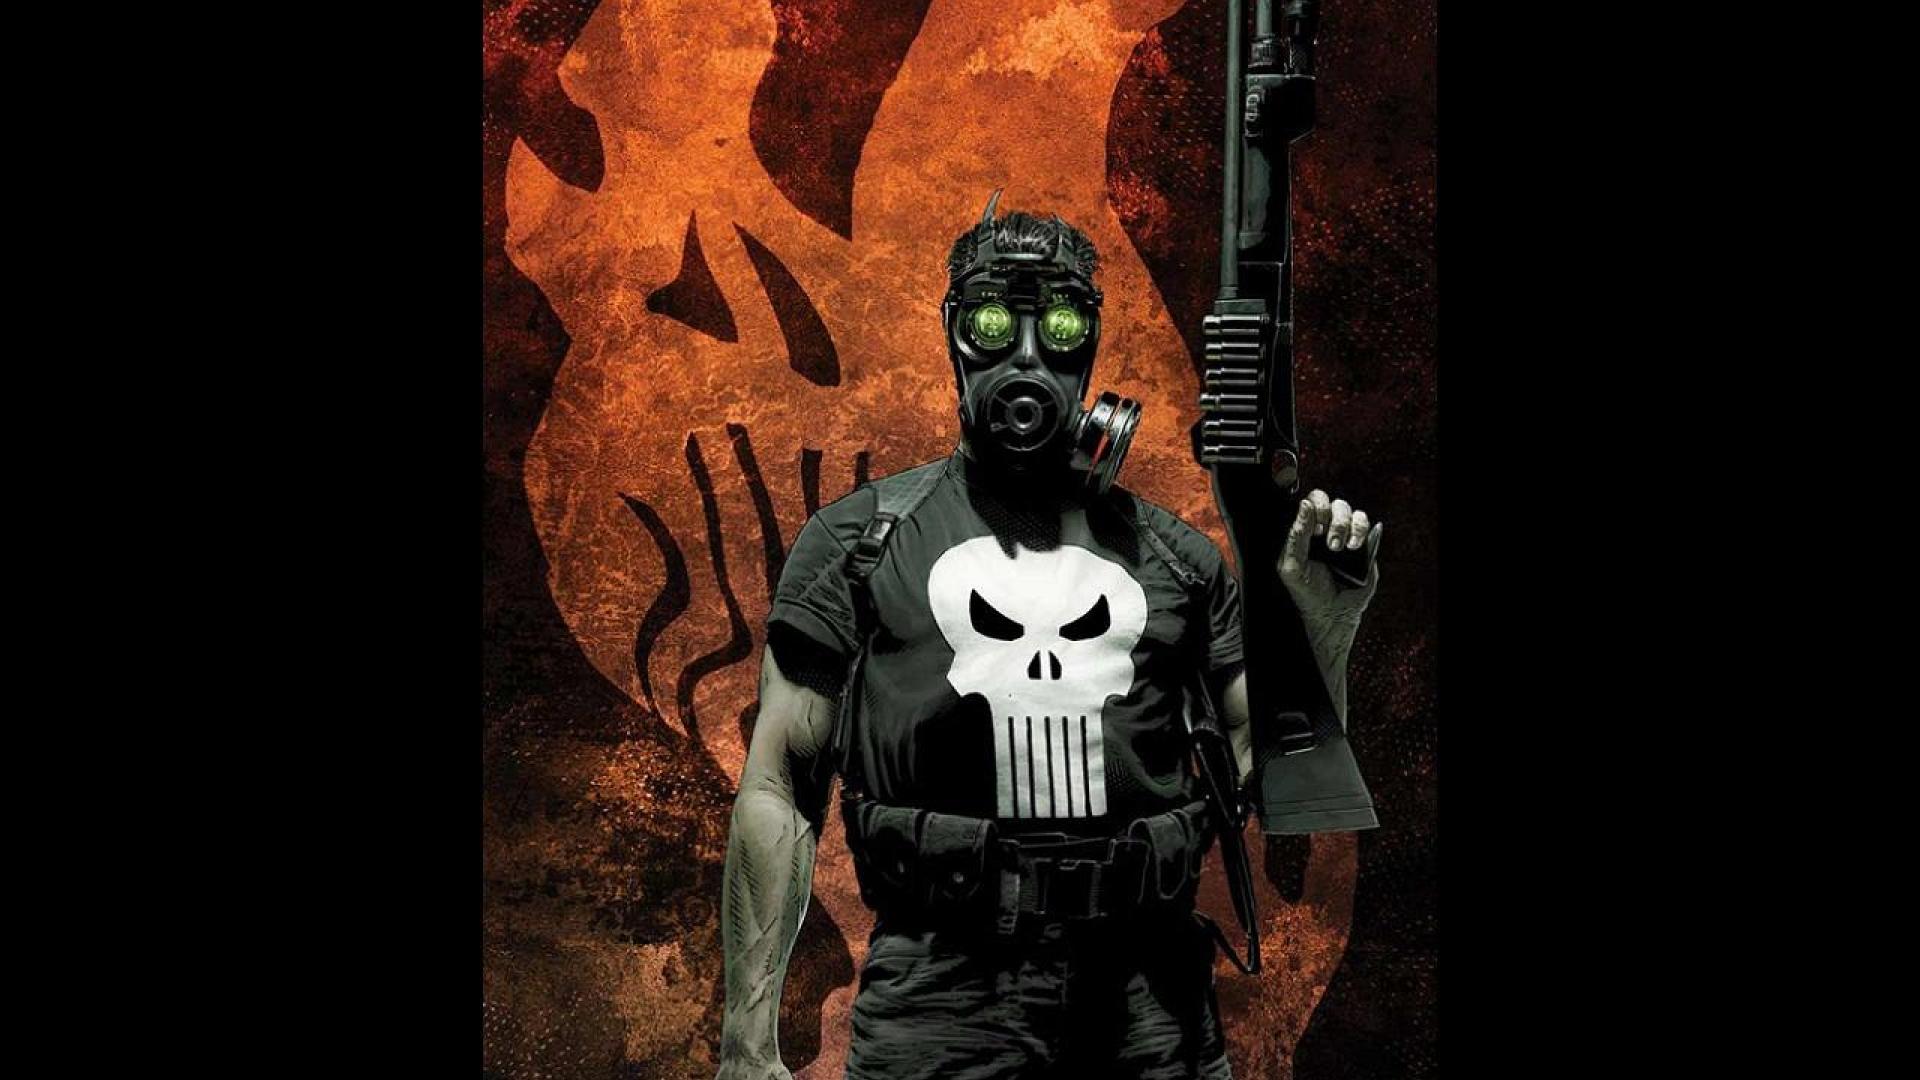 THE PUNISHER marvel he wallpaper 1920x1080 140007 WallpaperUP 1920x1080